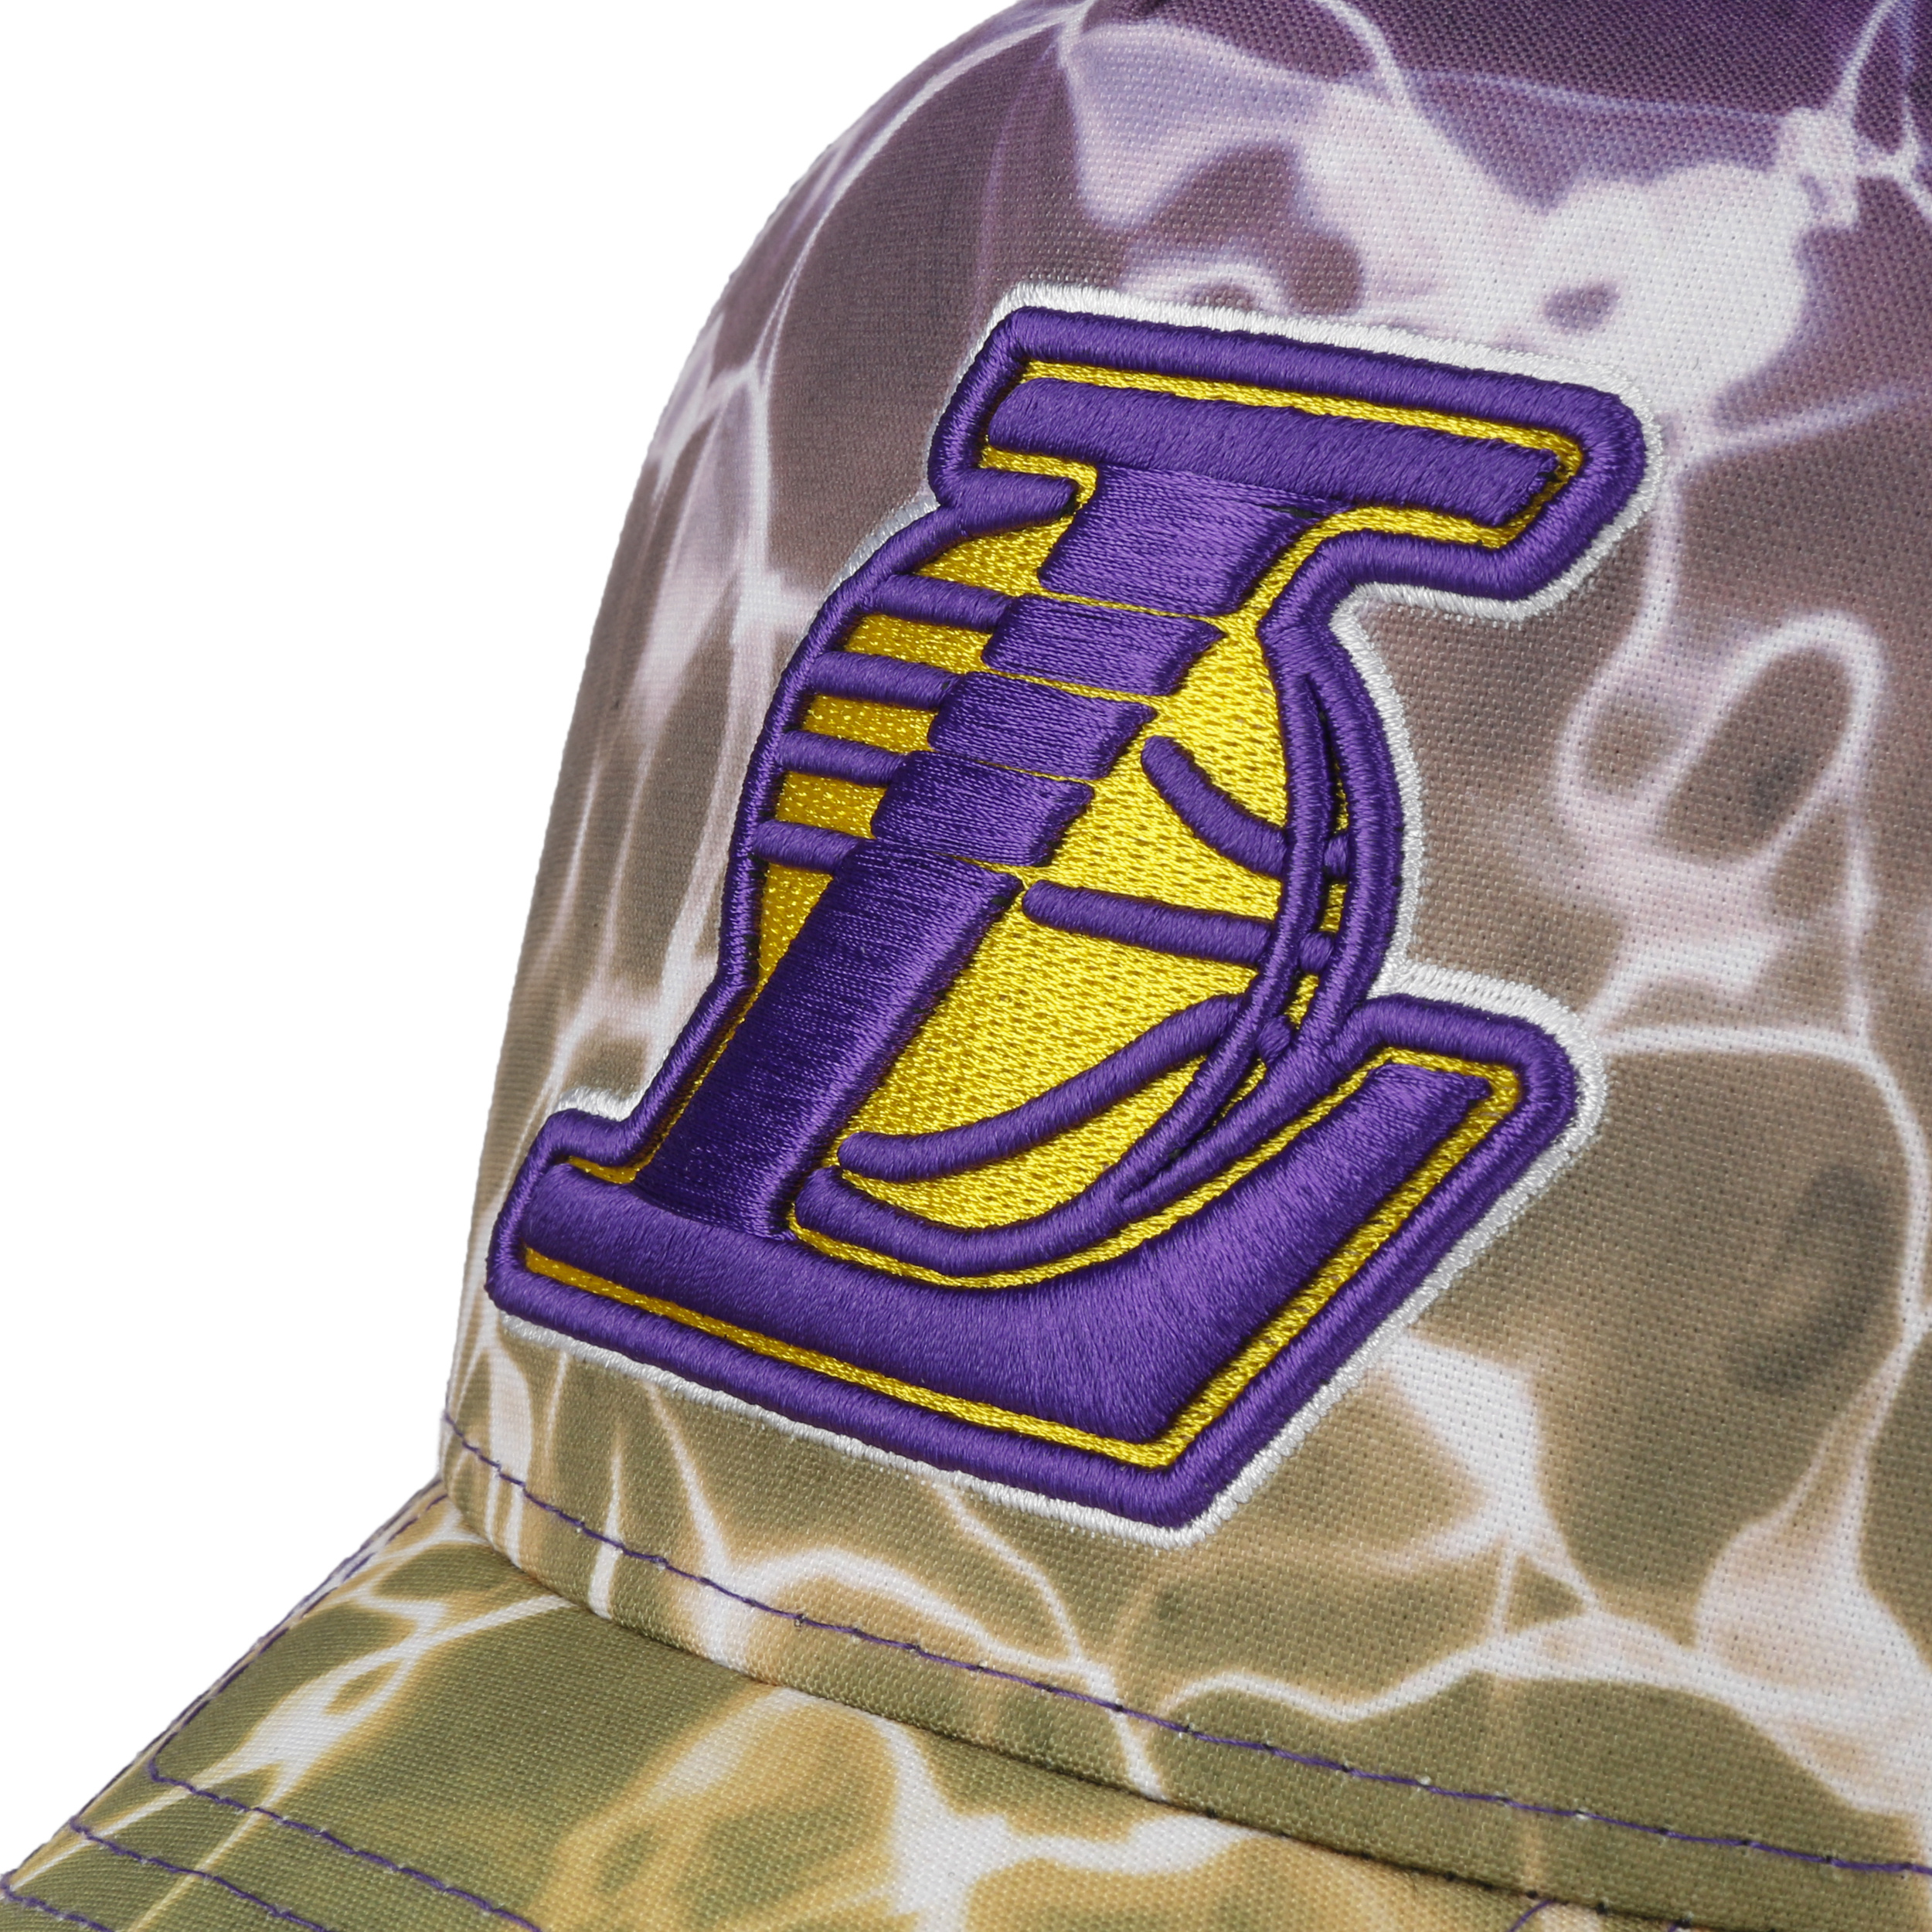 NEW ERA CAPS Los Angeles Lakers 9FORTY Trucker Hat 70723717 - Shiekh